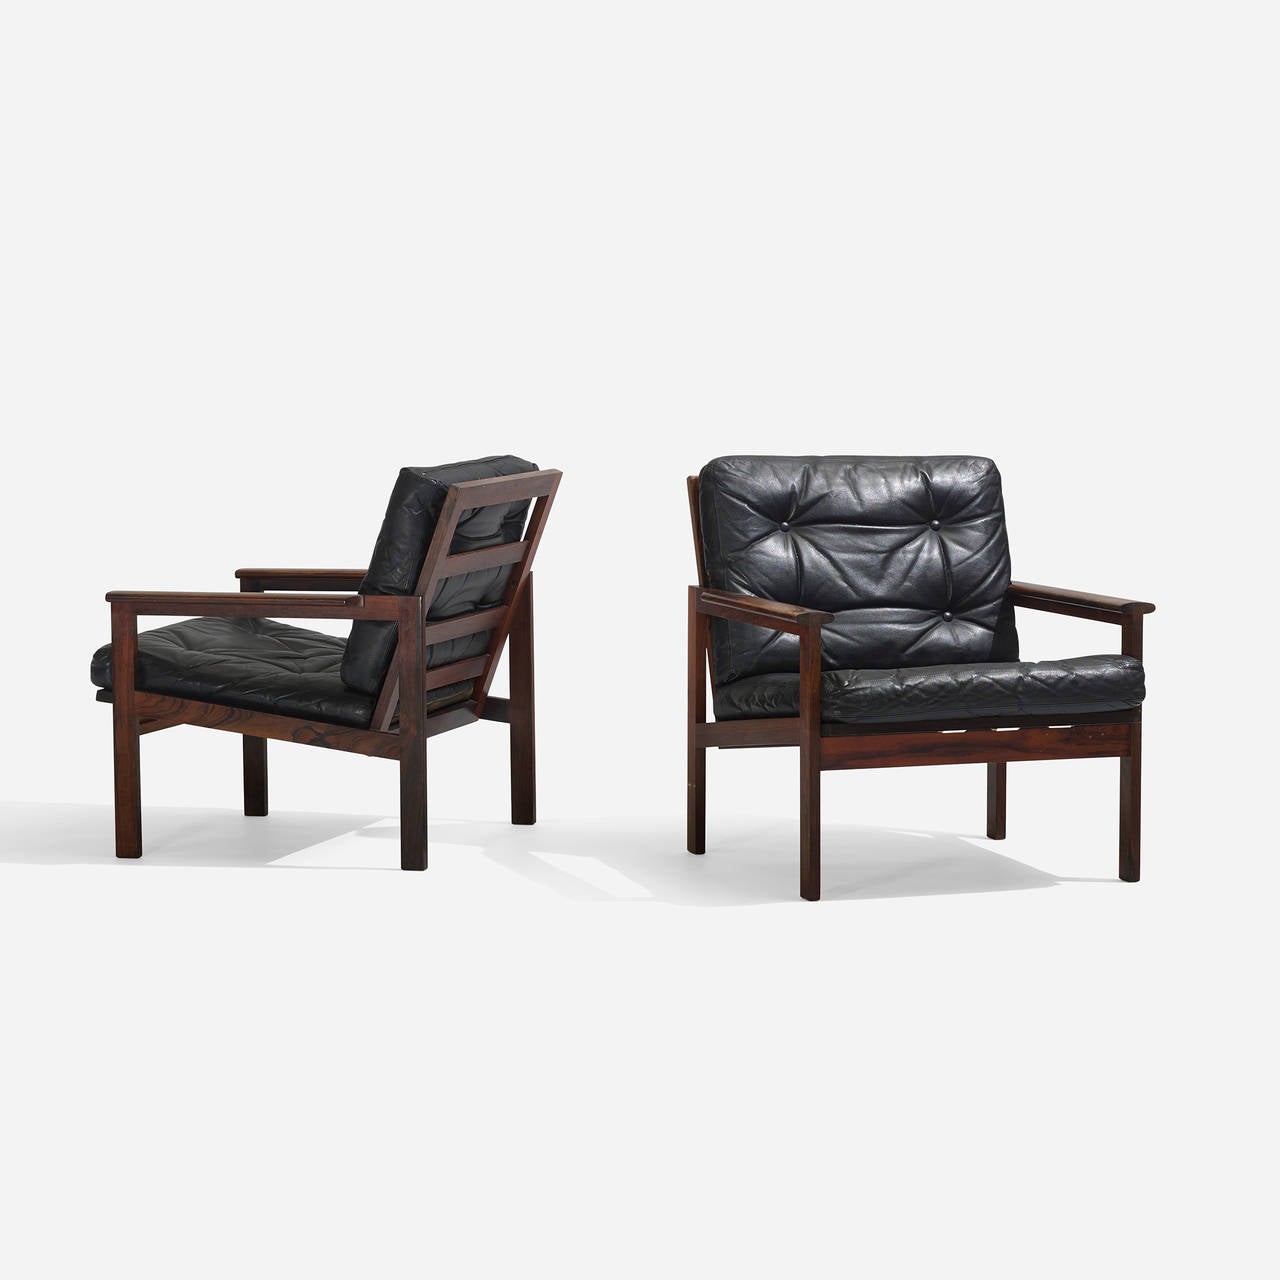 Lounge chairs model no. 4, pair by Illum Wikkelsø for N. Eilersen A/S.